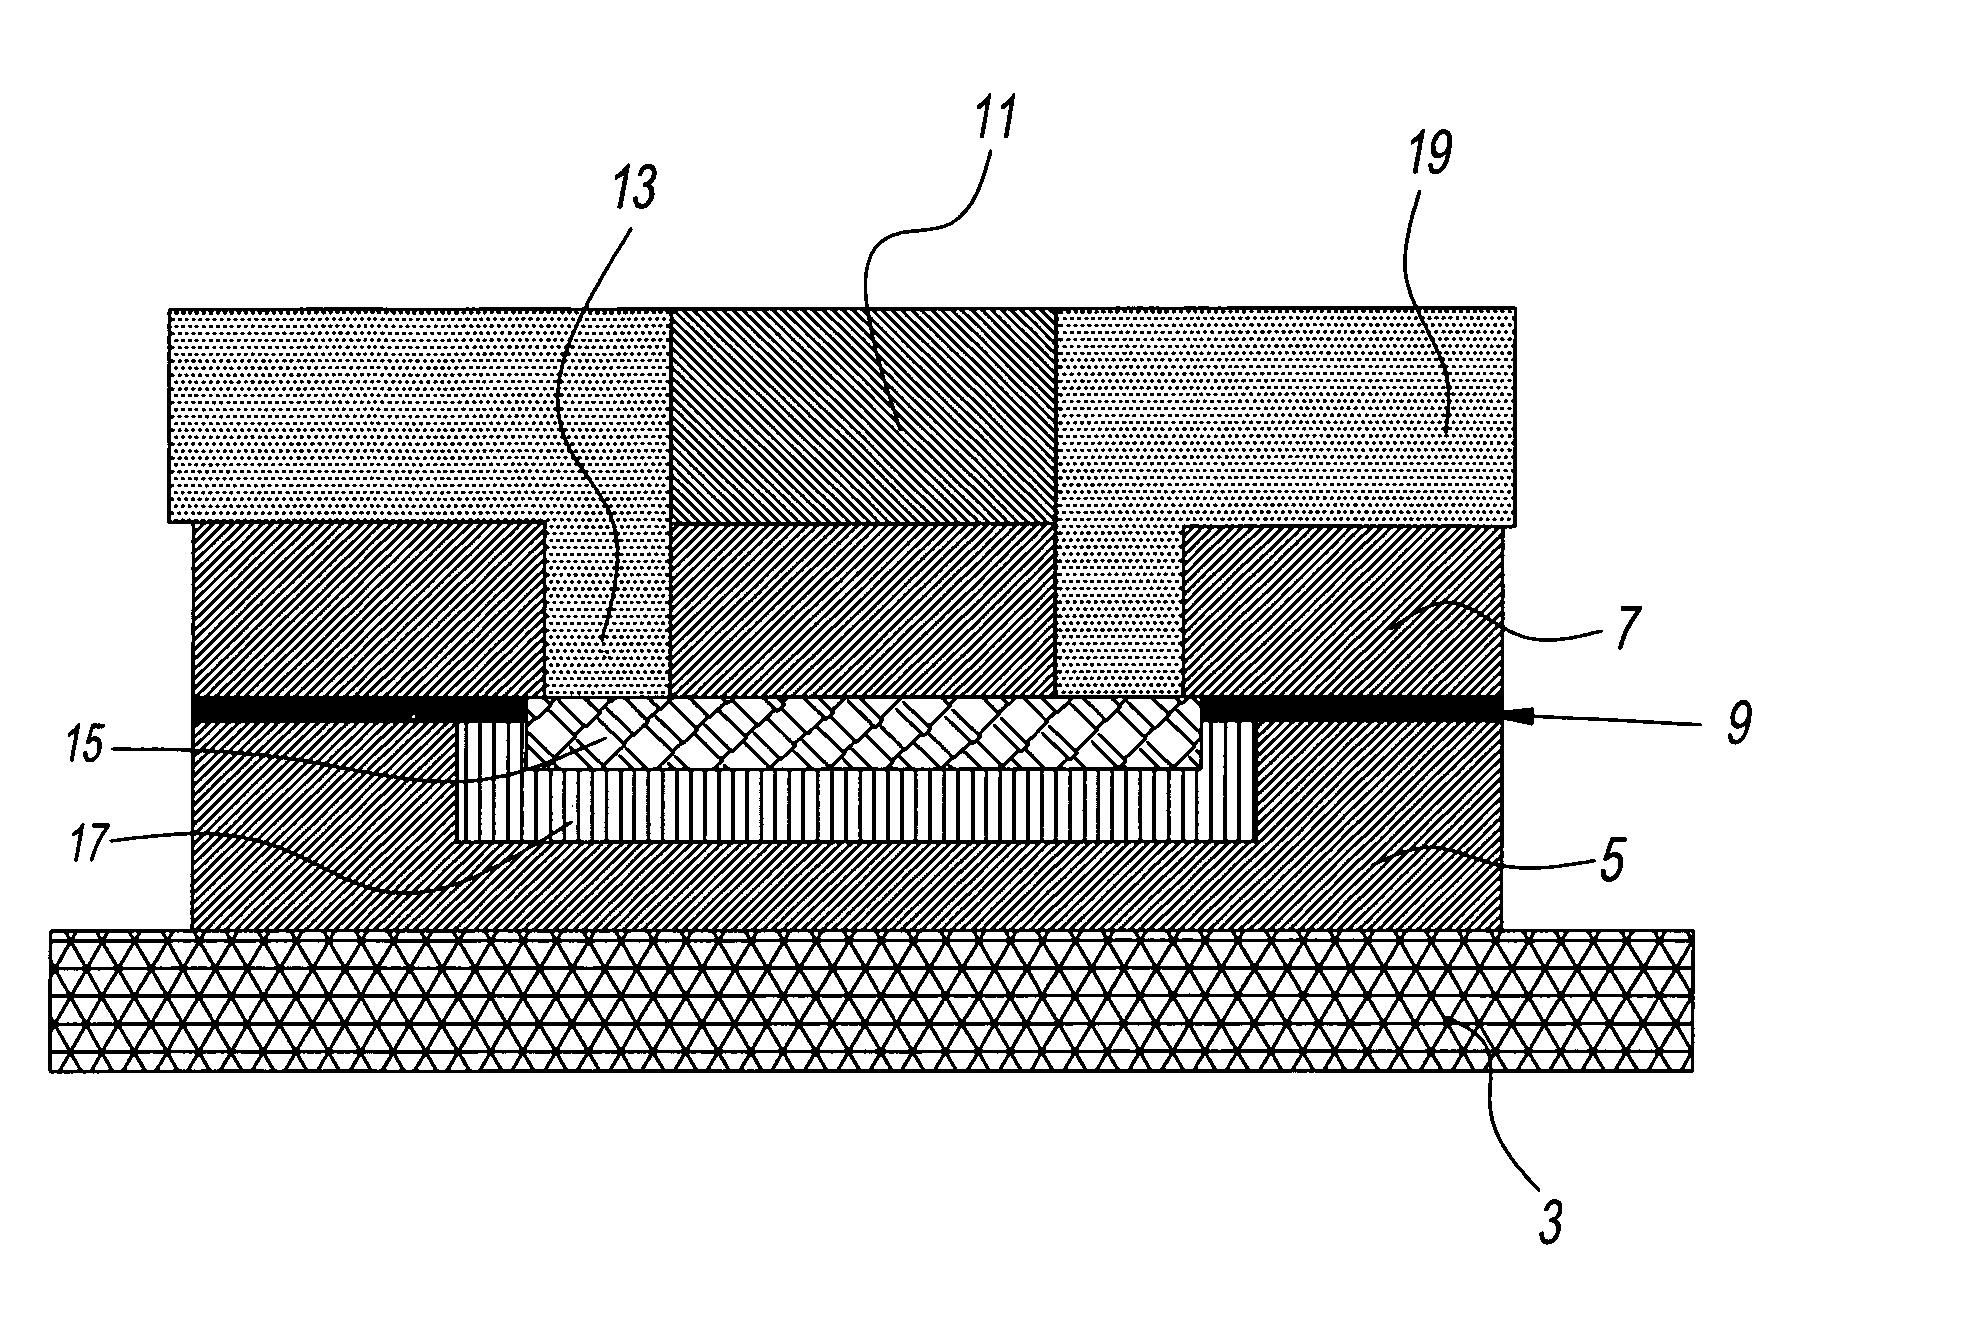 Reprogrammable fuse structure and method